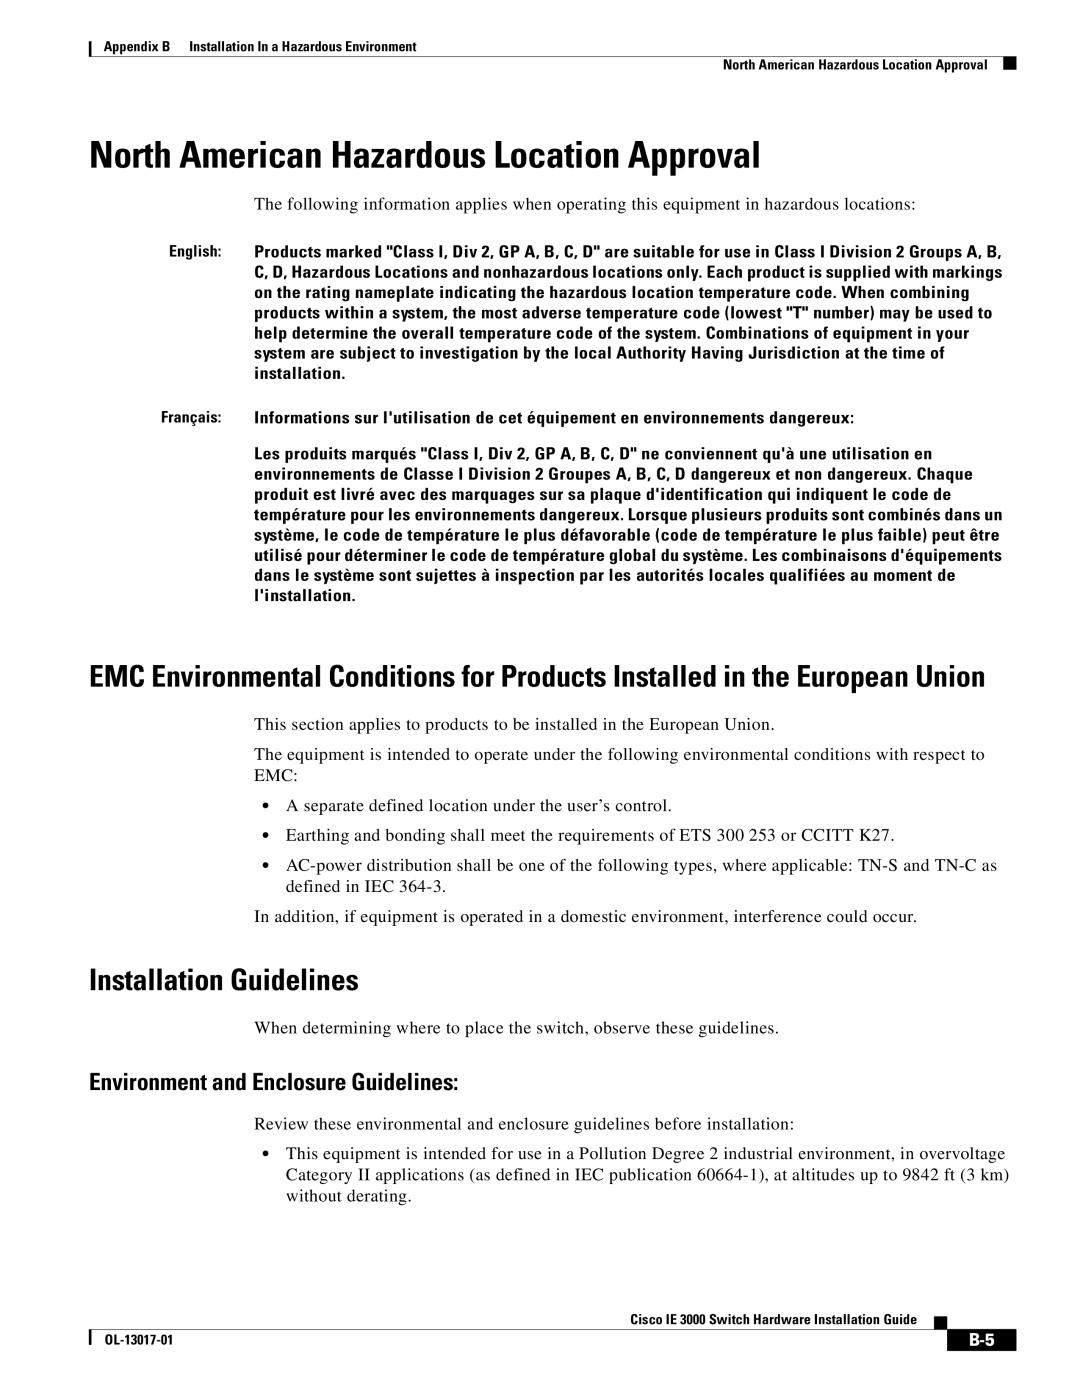 Cisco Systems IE 3000 Series, IEM30004PC manual North American Hazardous Location Approval, Installation Guidelines 